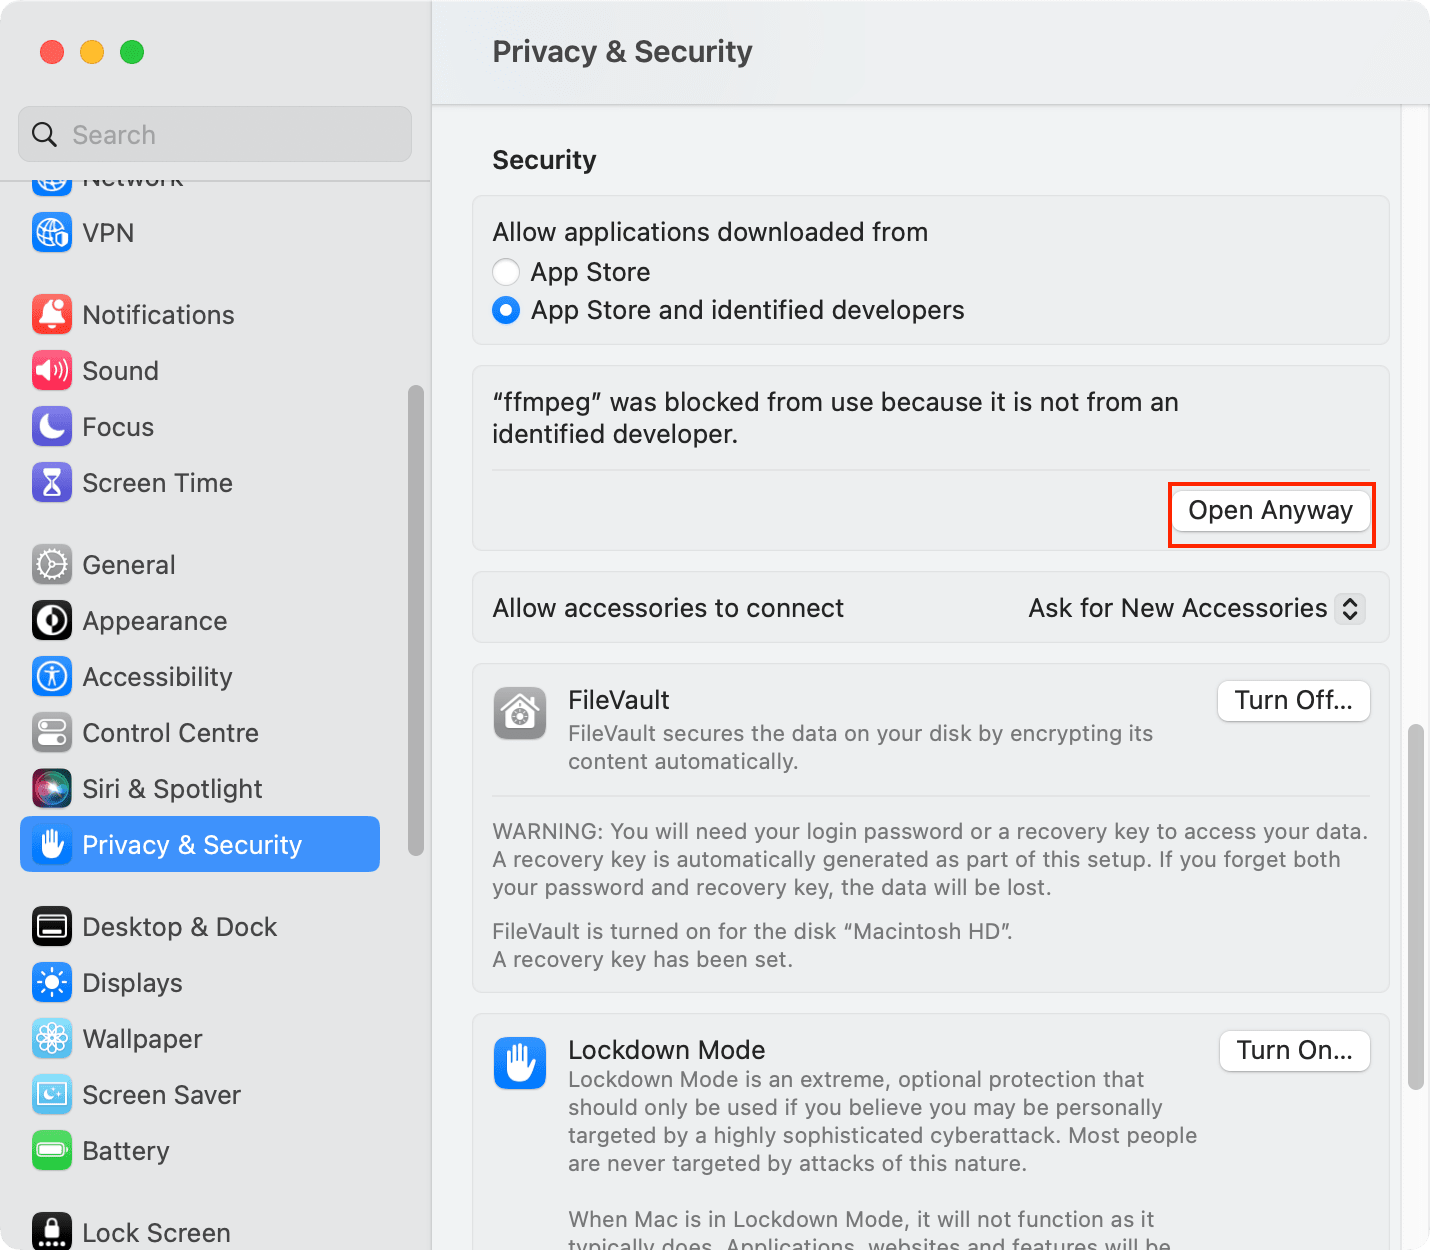 a screenshot of the 'Privacy & Security' settings